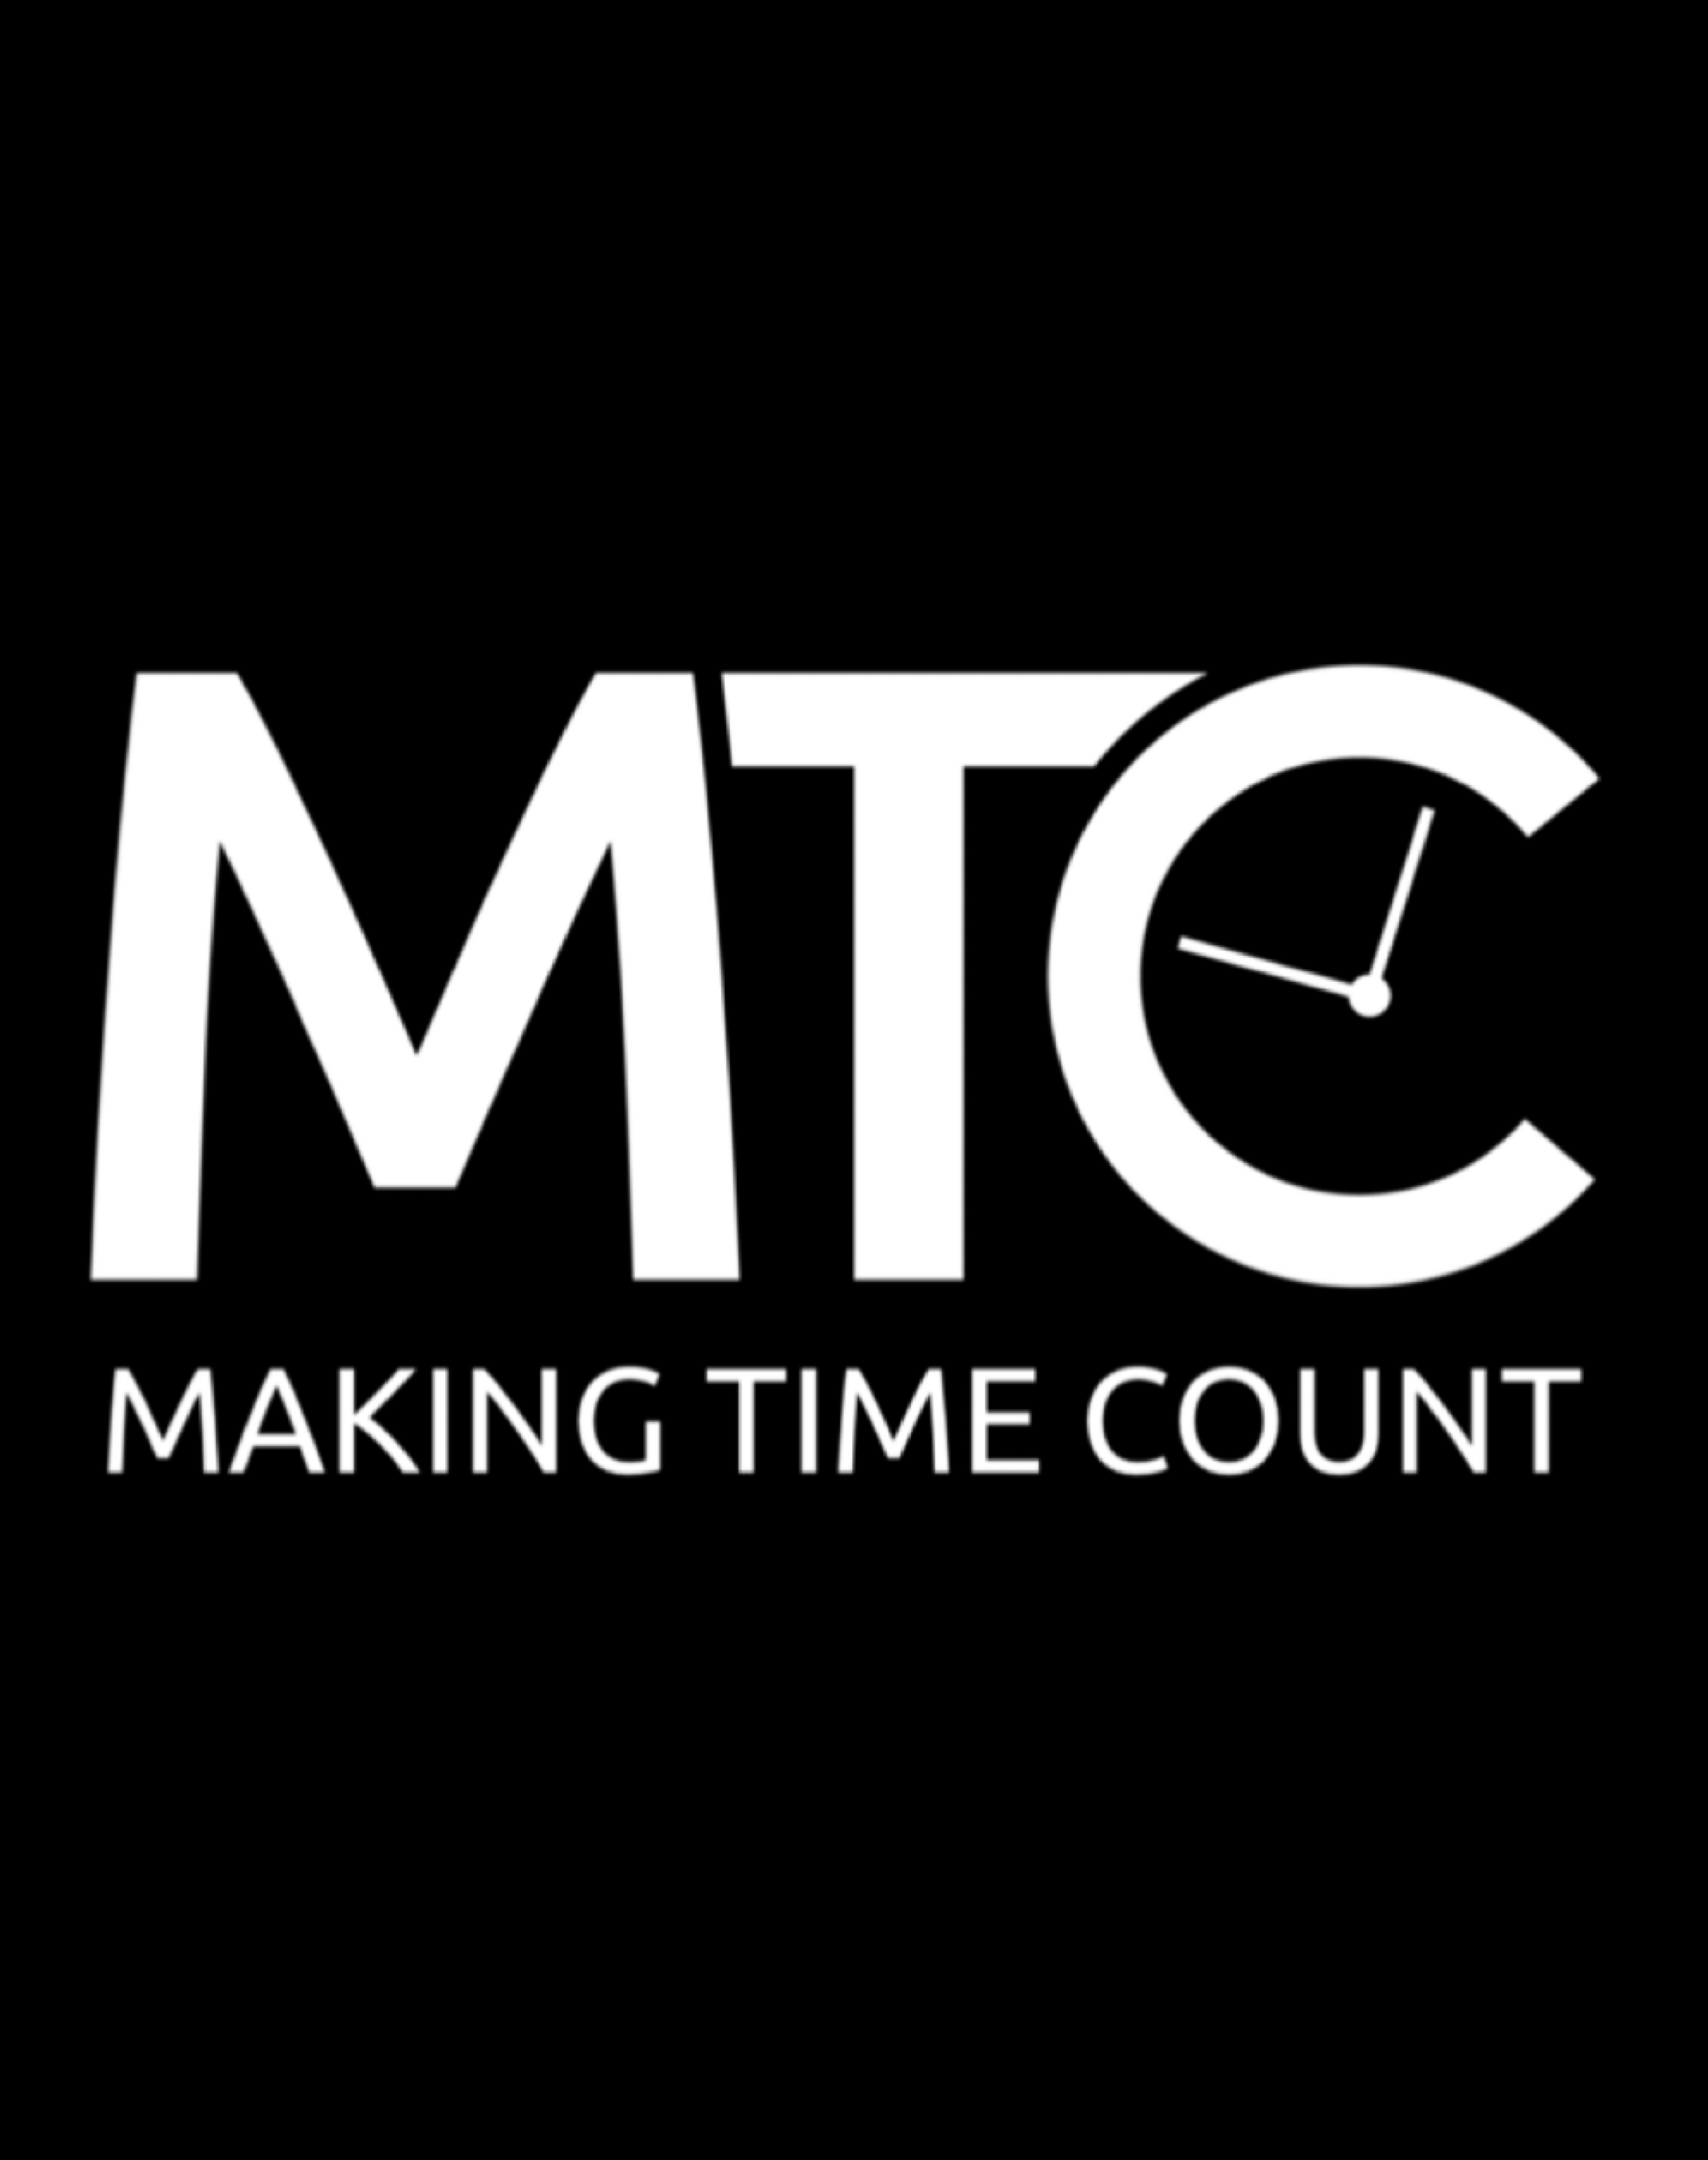 Making Time Count